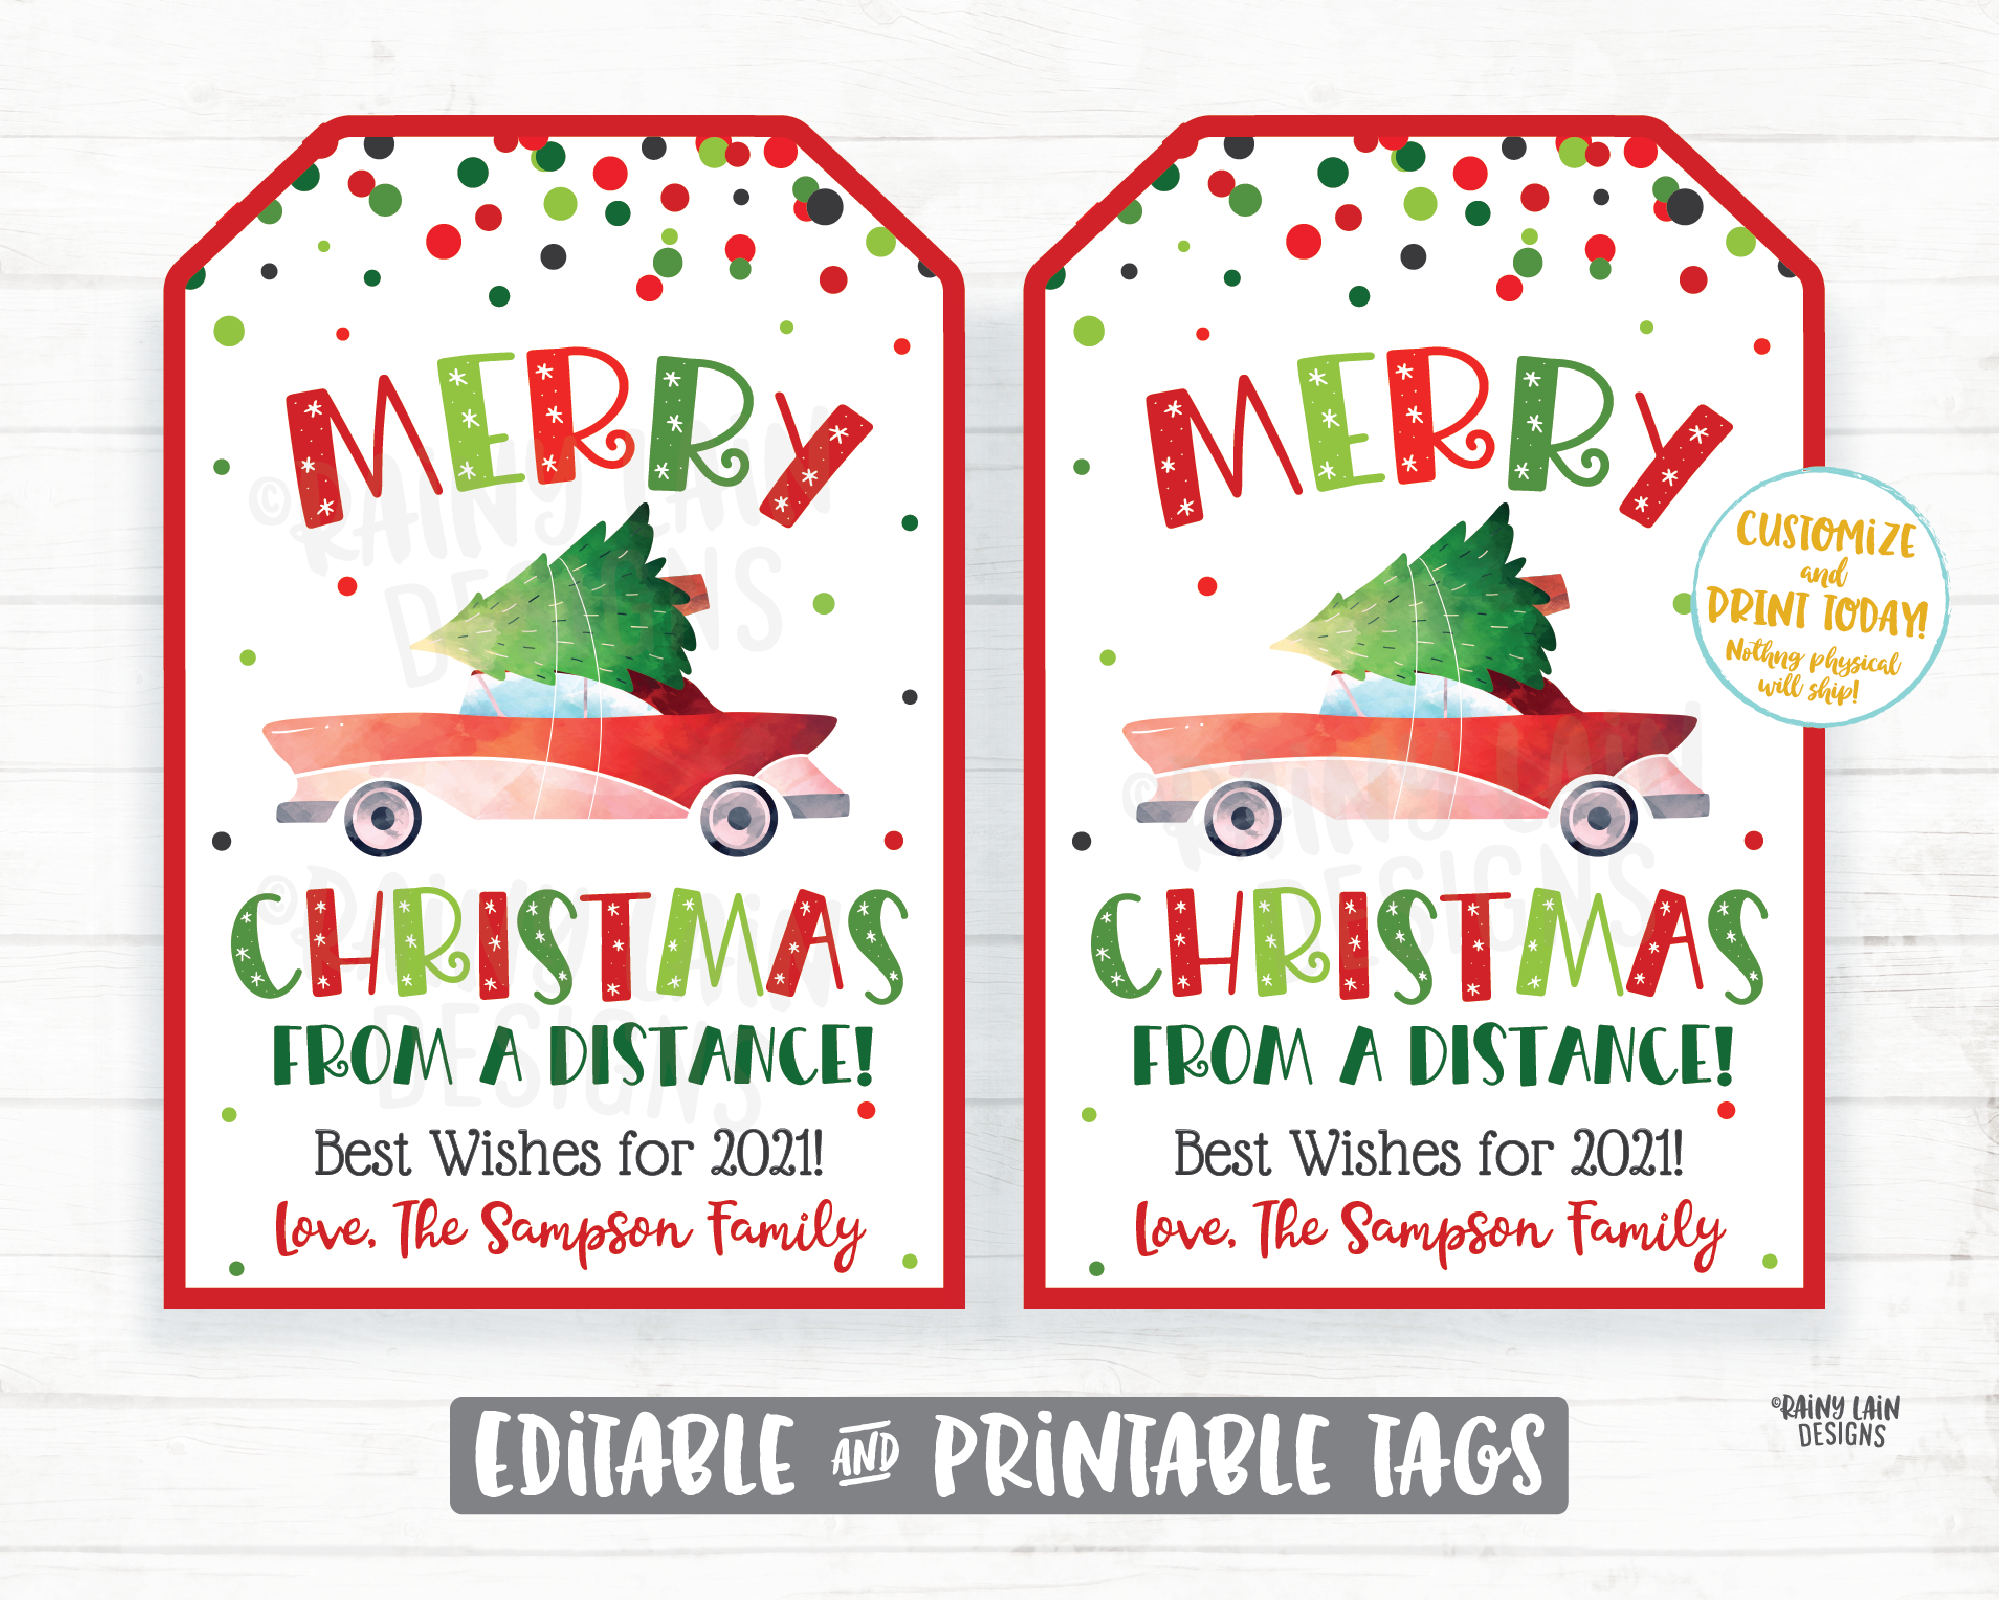 Merry Christmas From A Distance Tags Editable Holiday Gift Tags Printable Christmas Tags Christmas Mask Tags 2020 Social Distancing Pandemic